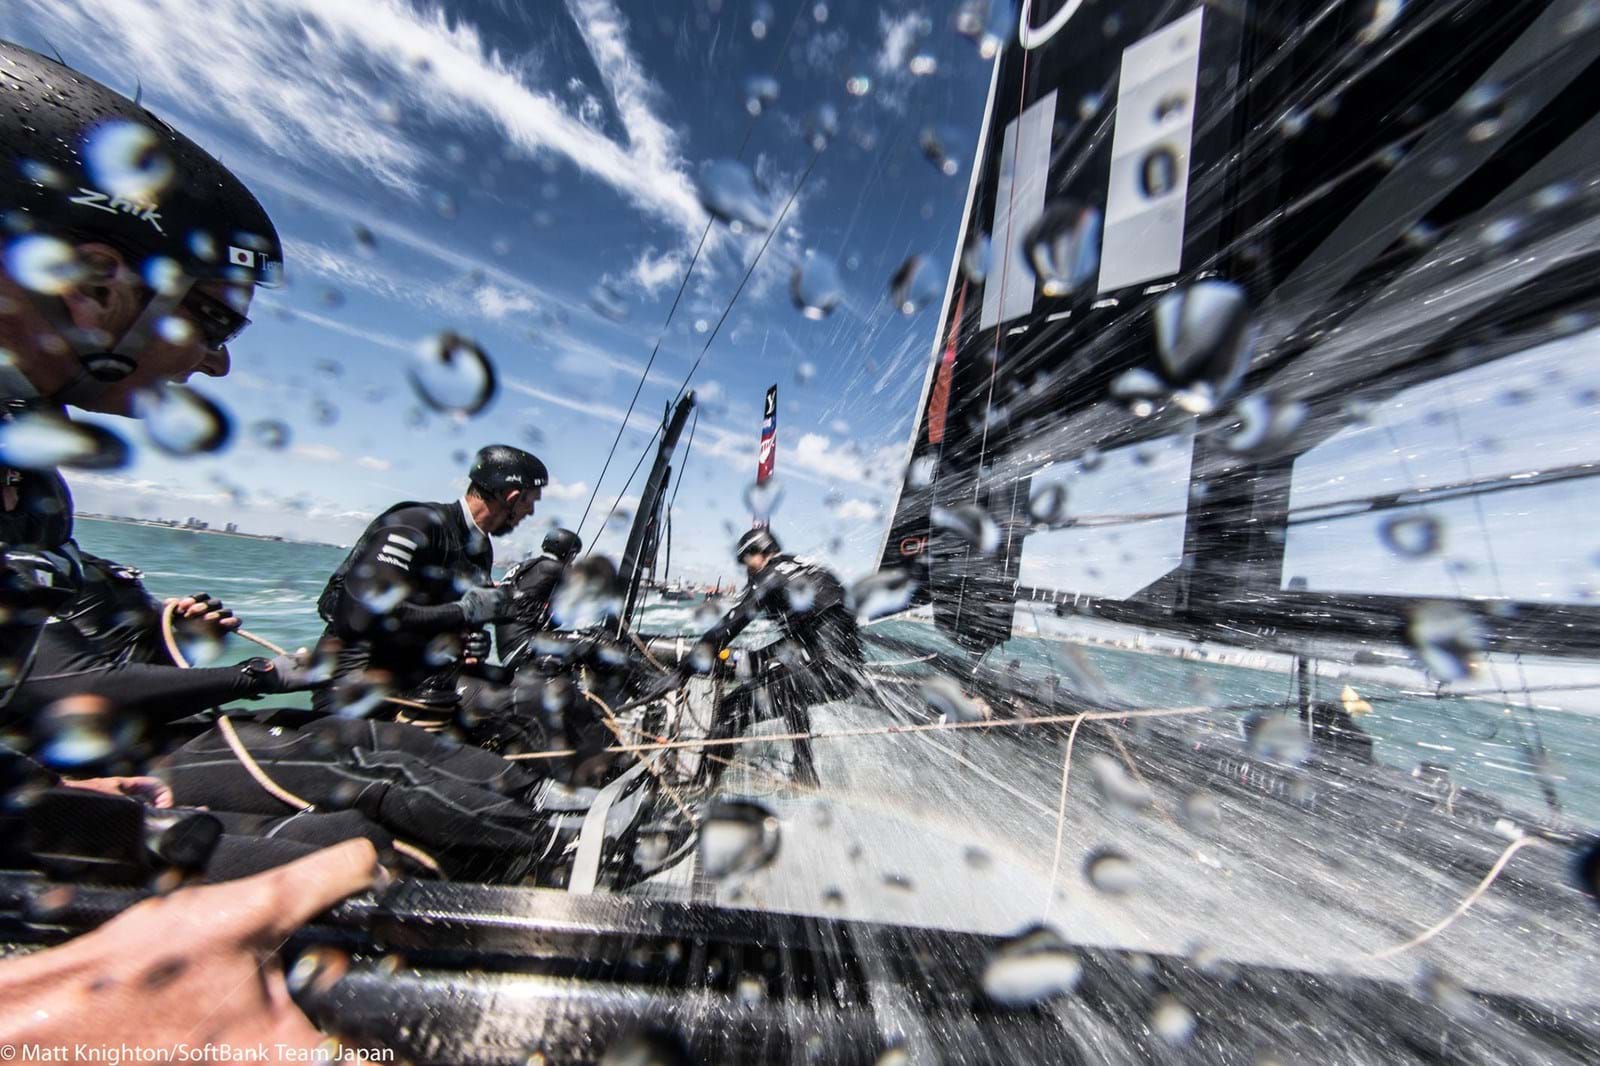 SUNSET+VINE TO PRODUCE BT SPORT'S AMERICA'S CUP COVERAGE